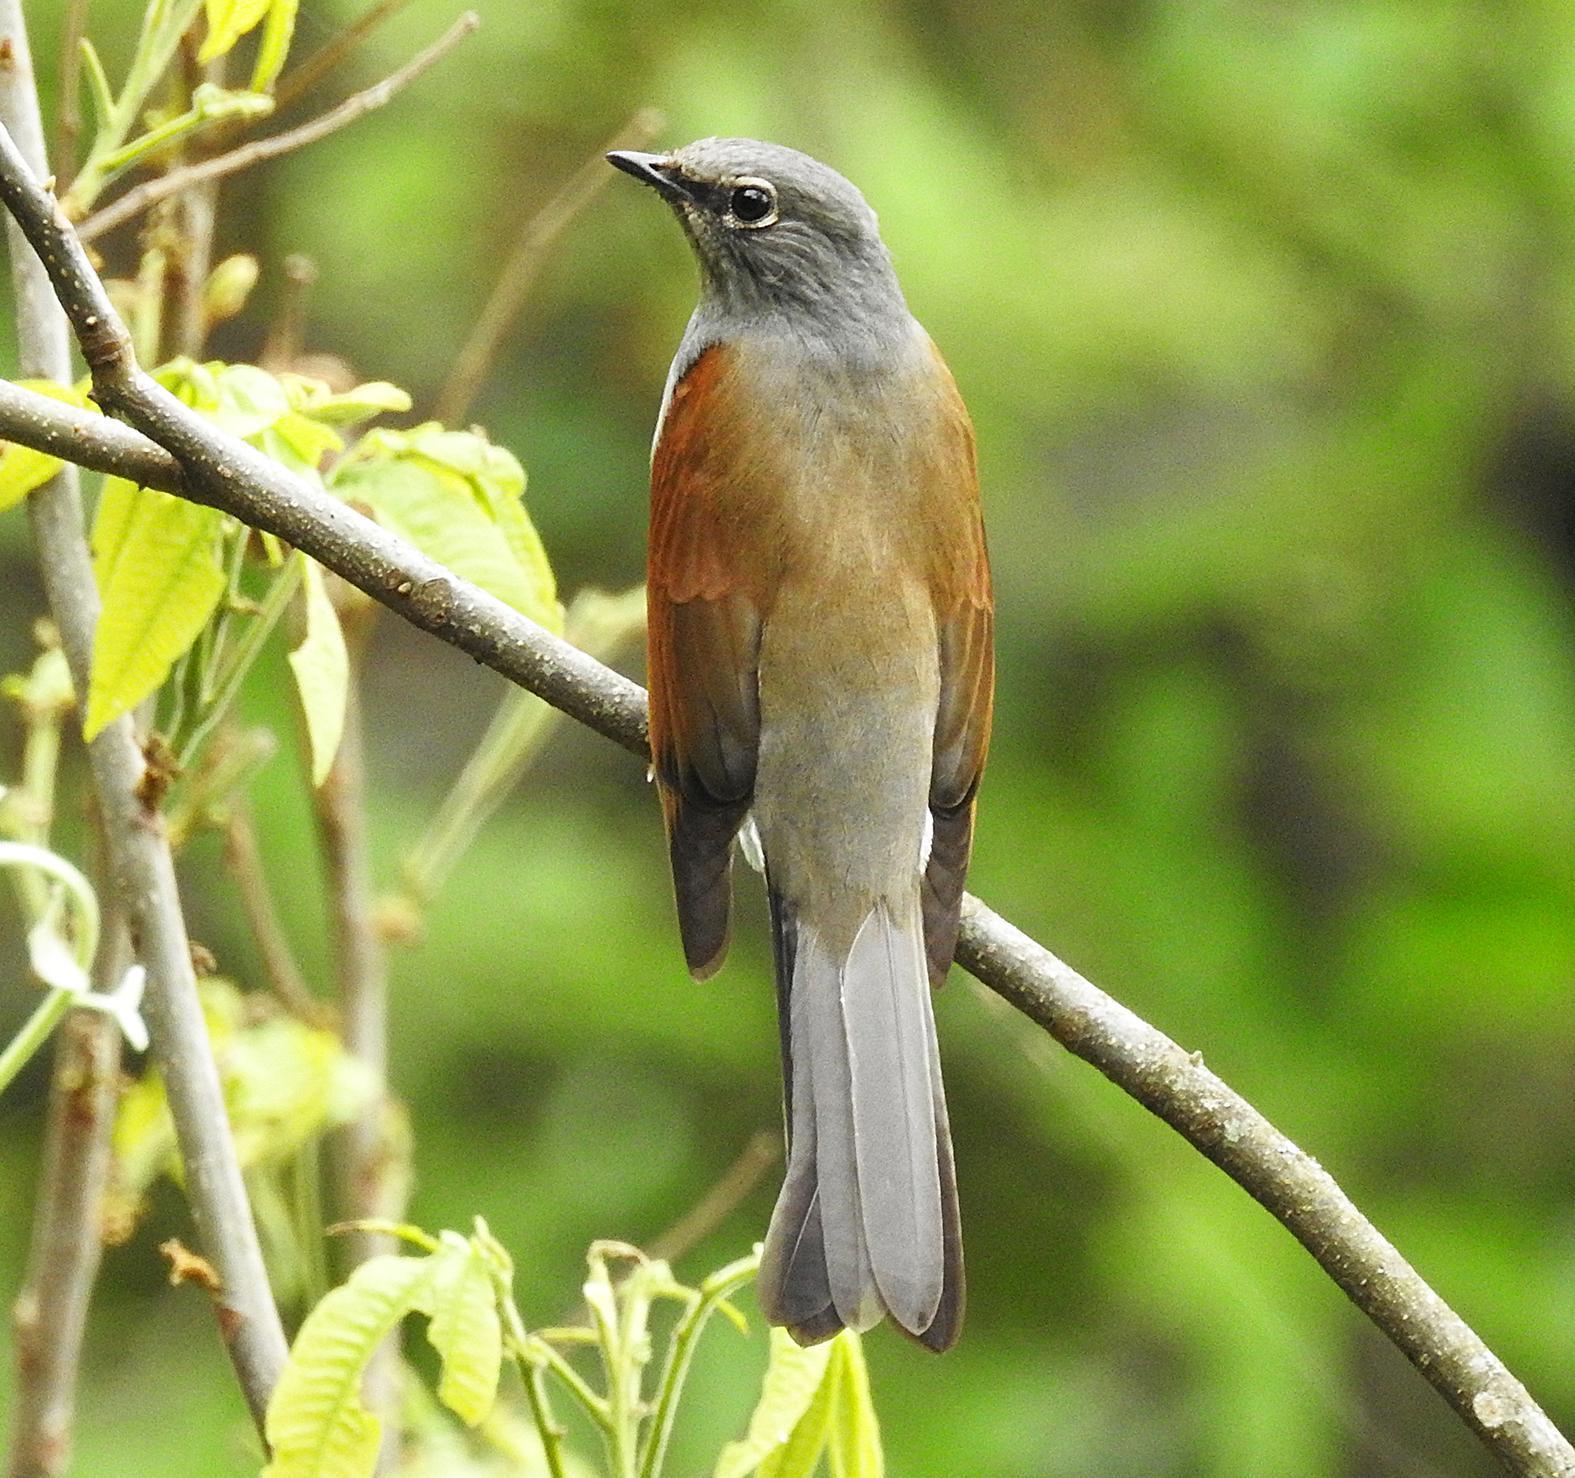 Brown-backed Solitaire Photo by Alejandra Perez